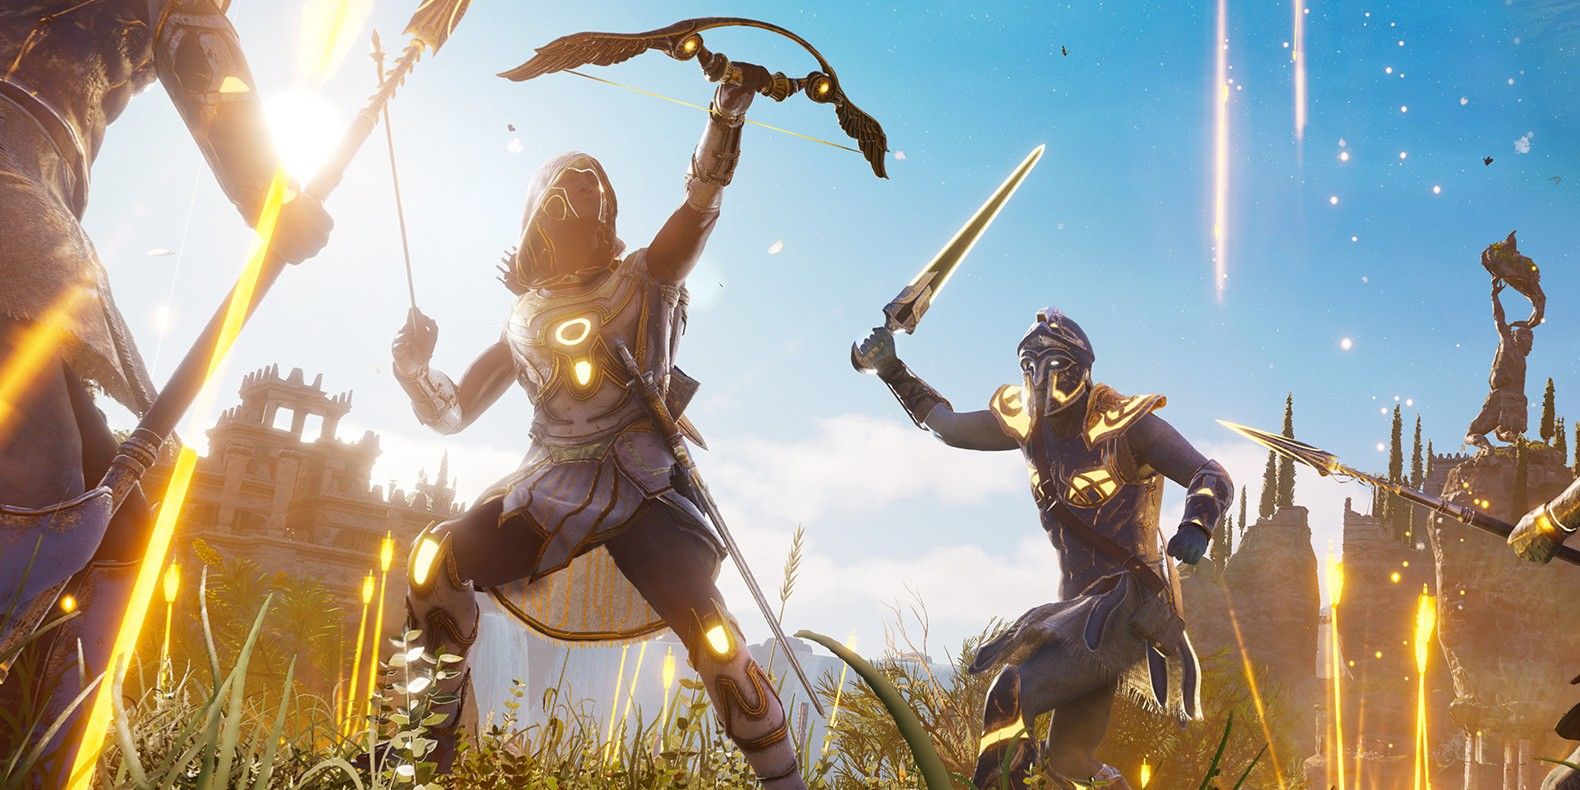 Assassin's Creed Odyssey Raining Arrows Ability in Fate of Atlantis DLC